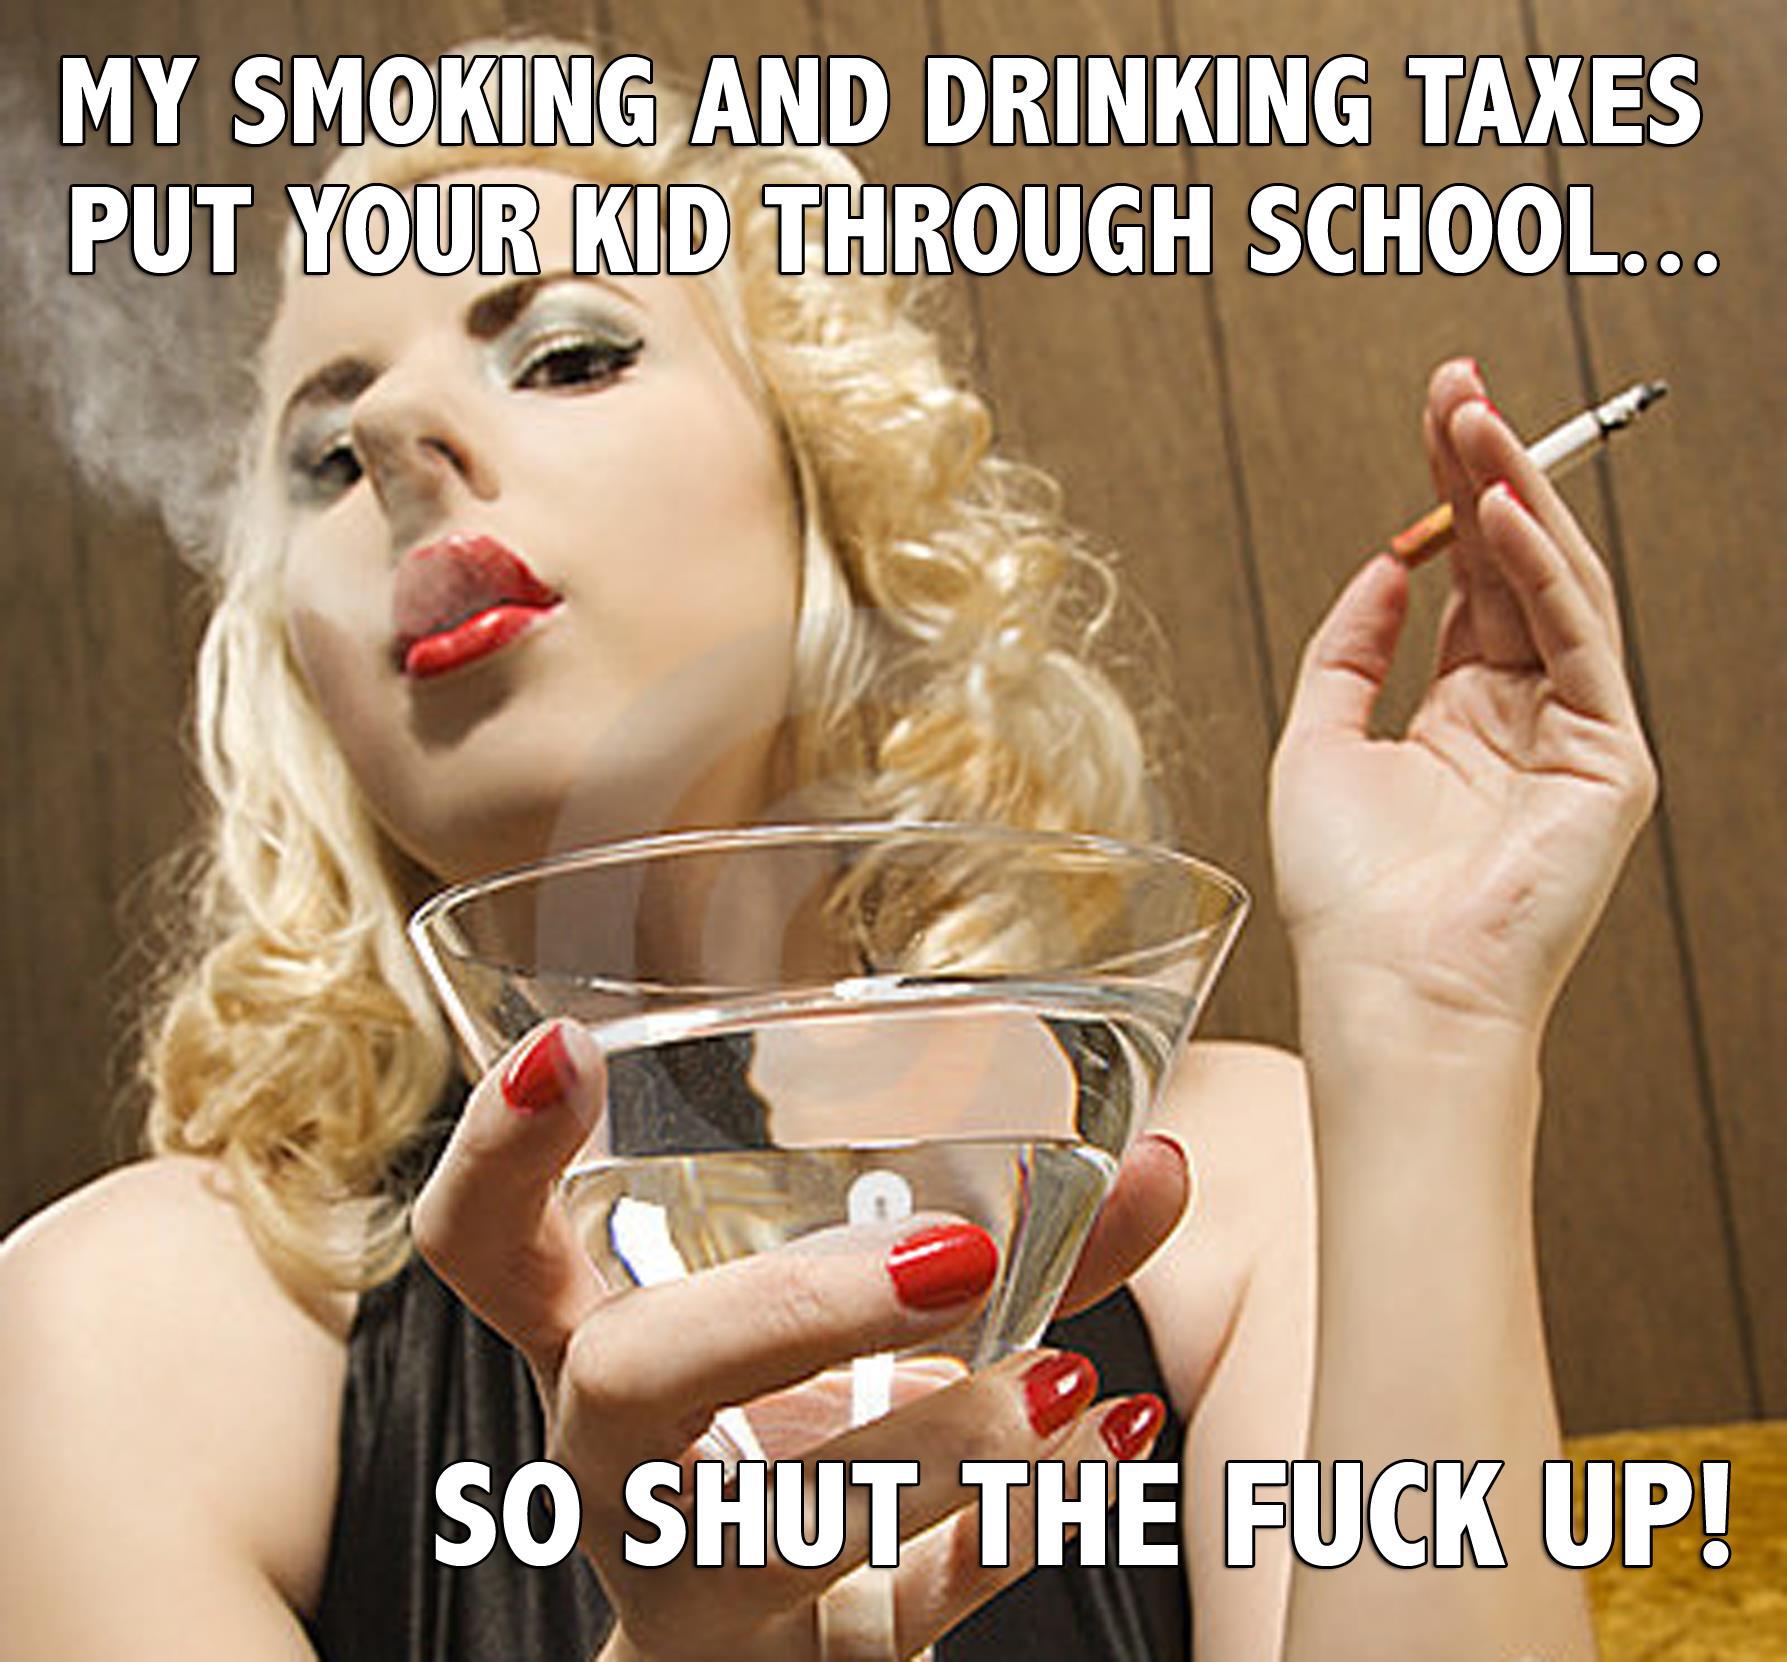 Smoking and drinking taxes
https://www.facebook.com/photo.php?fbid=189128577838578